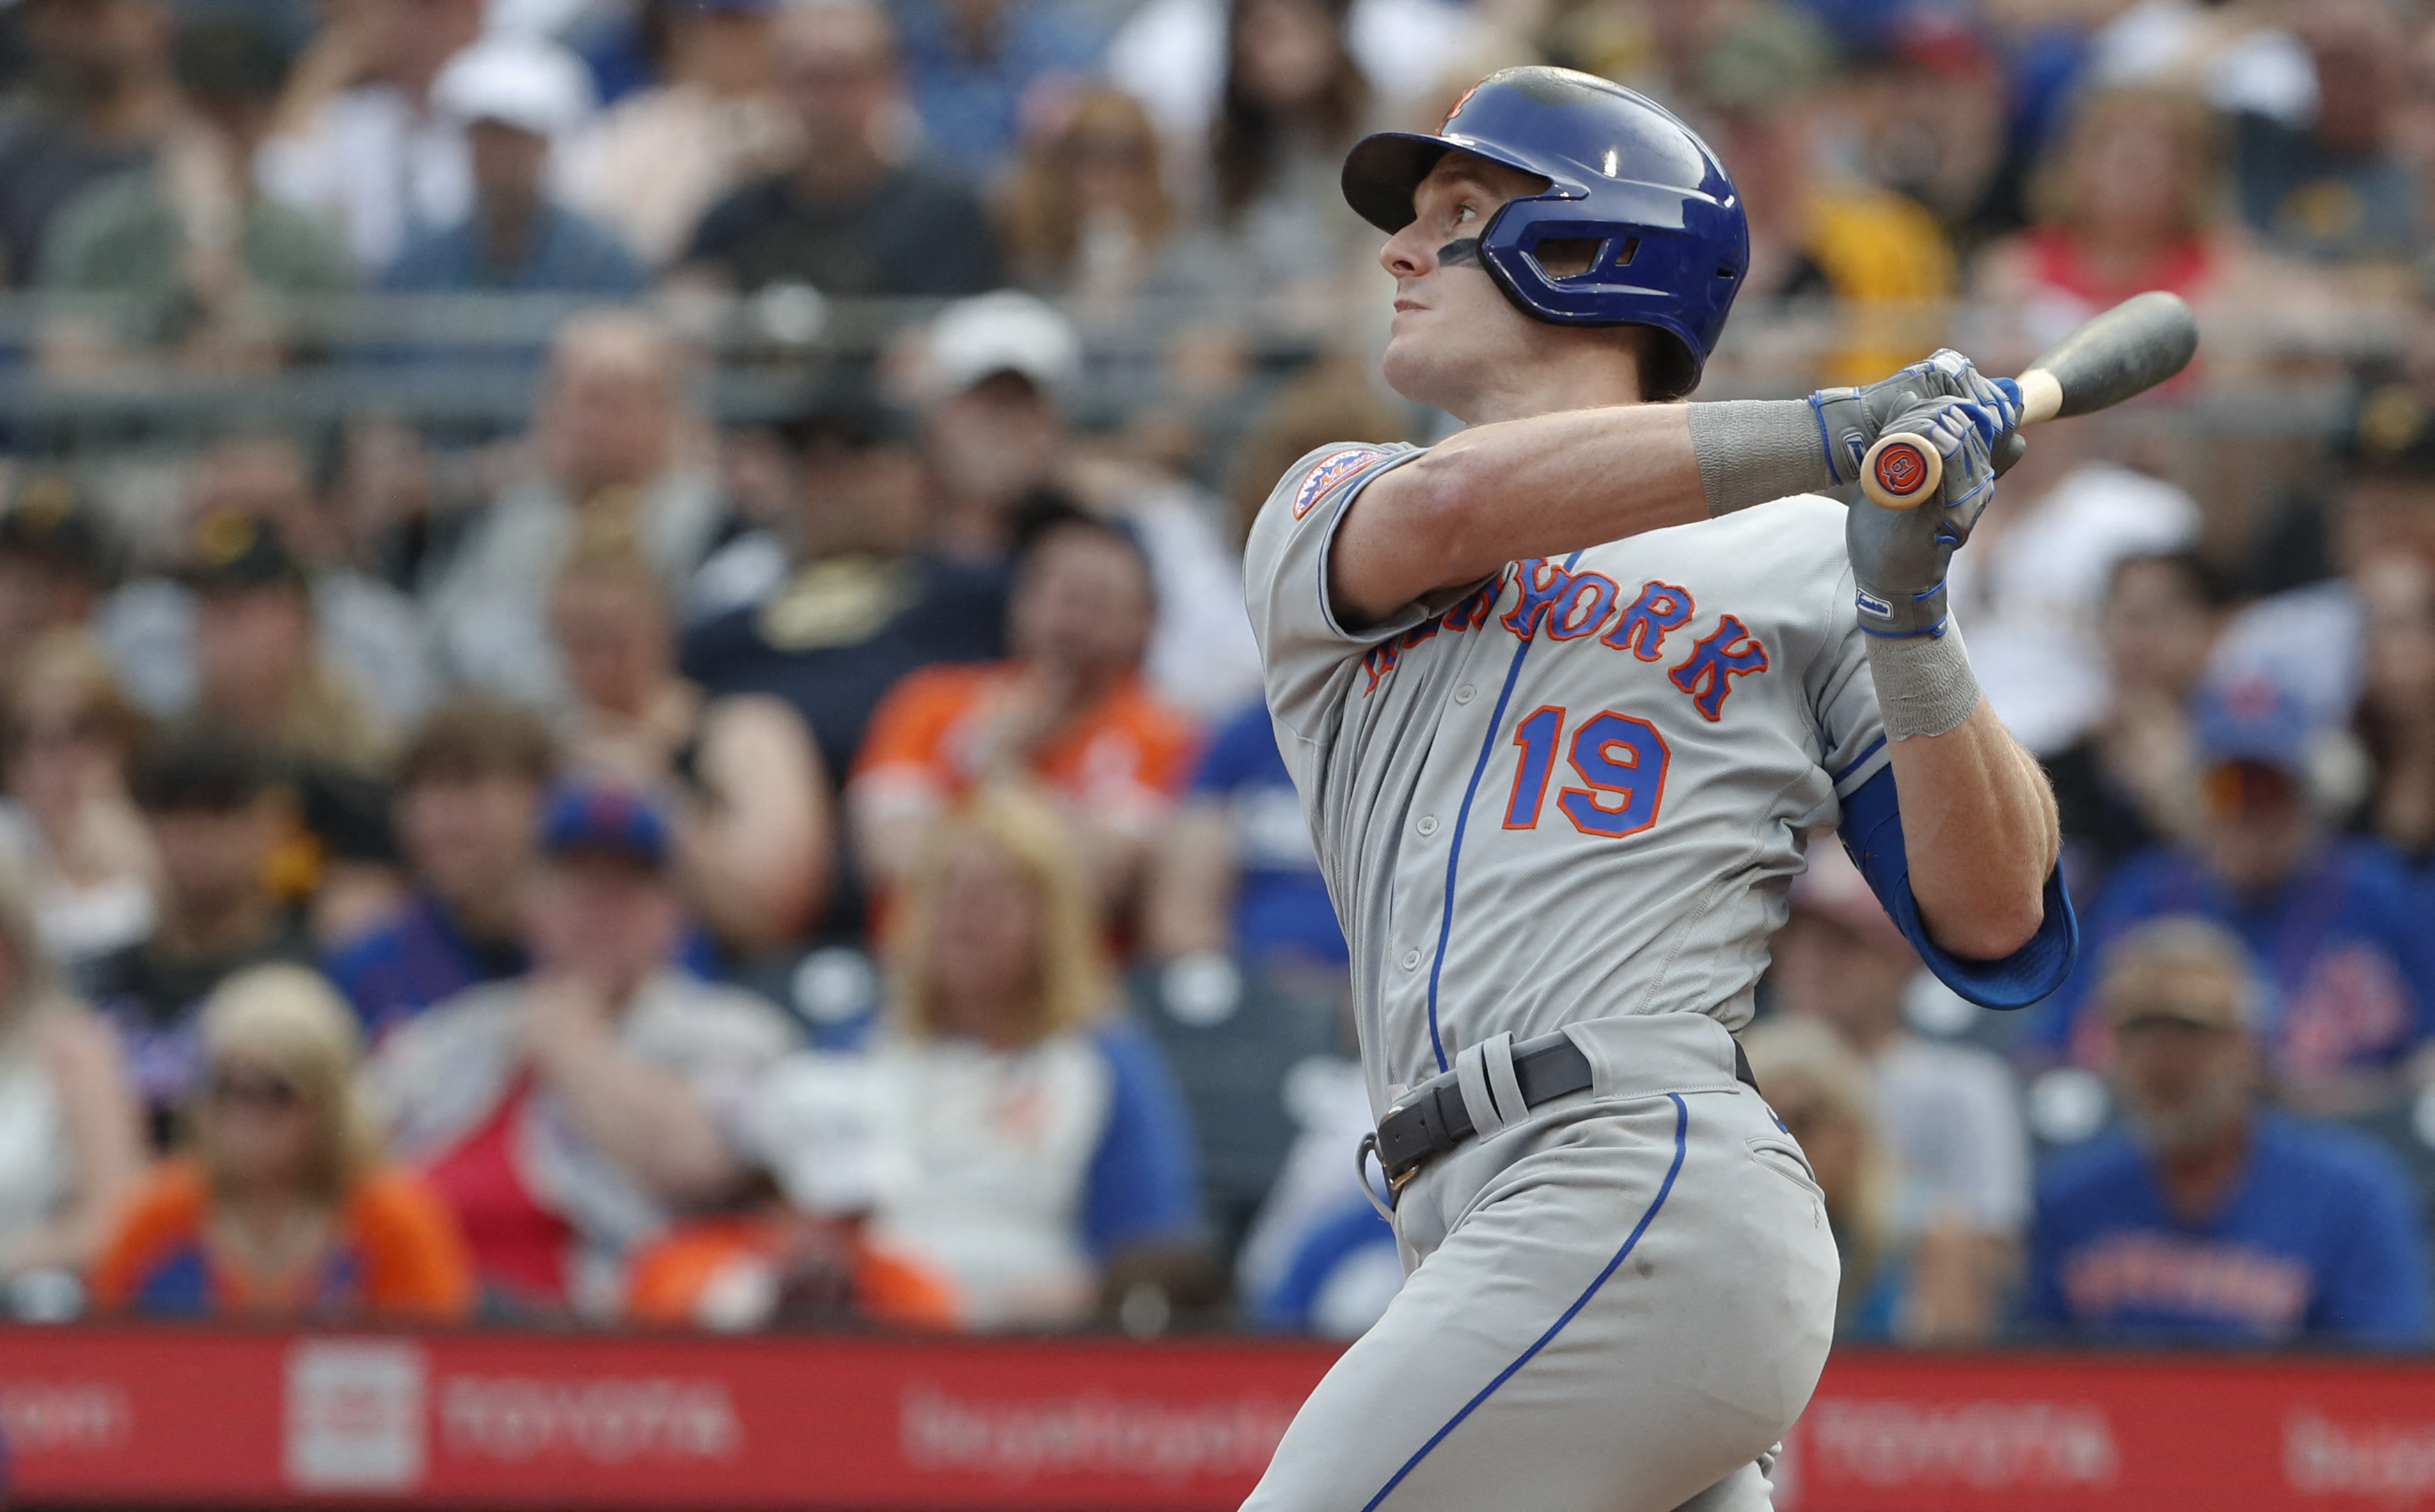 Mark Canha helps Mets beat Pirates, snap 7-game skid